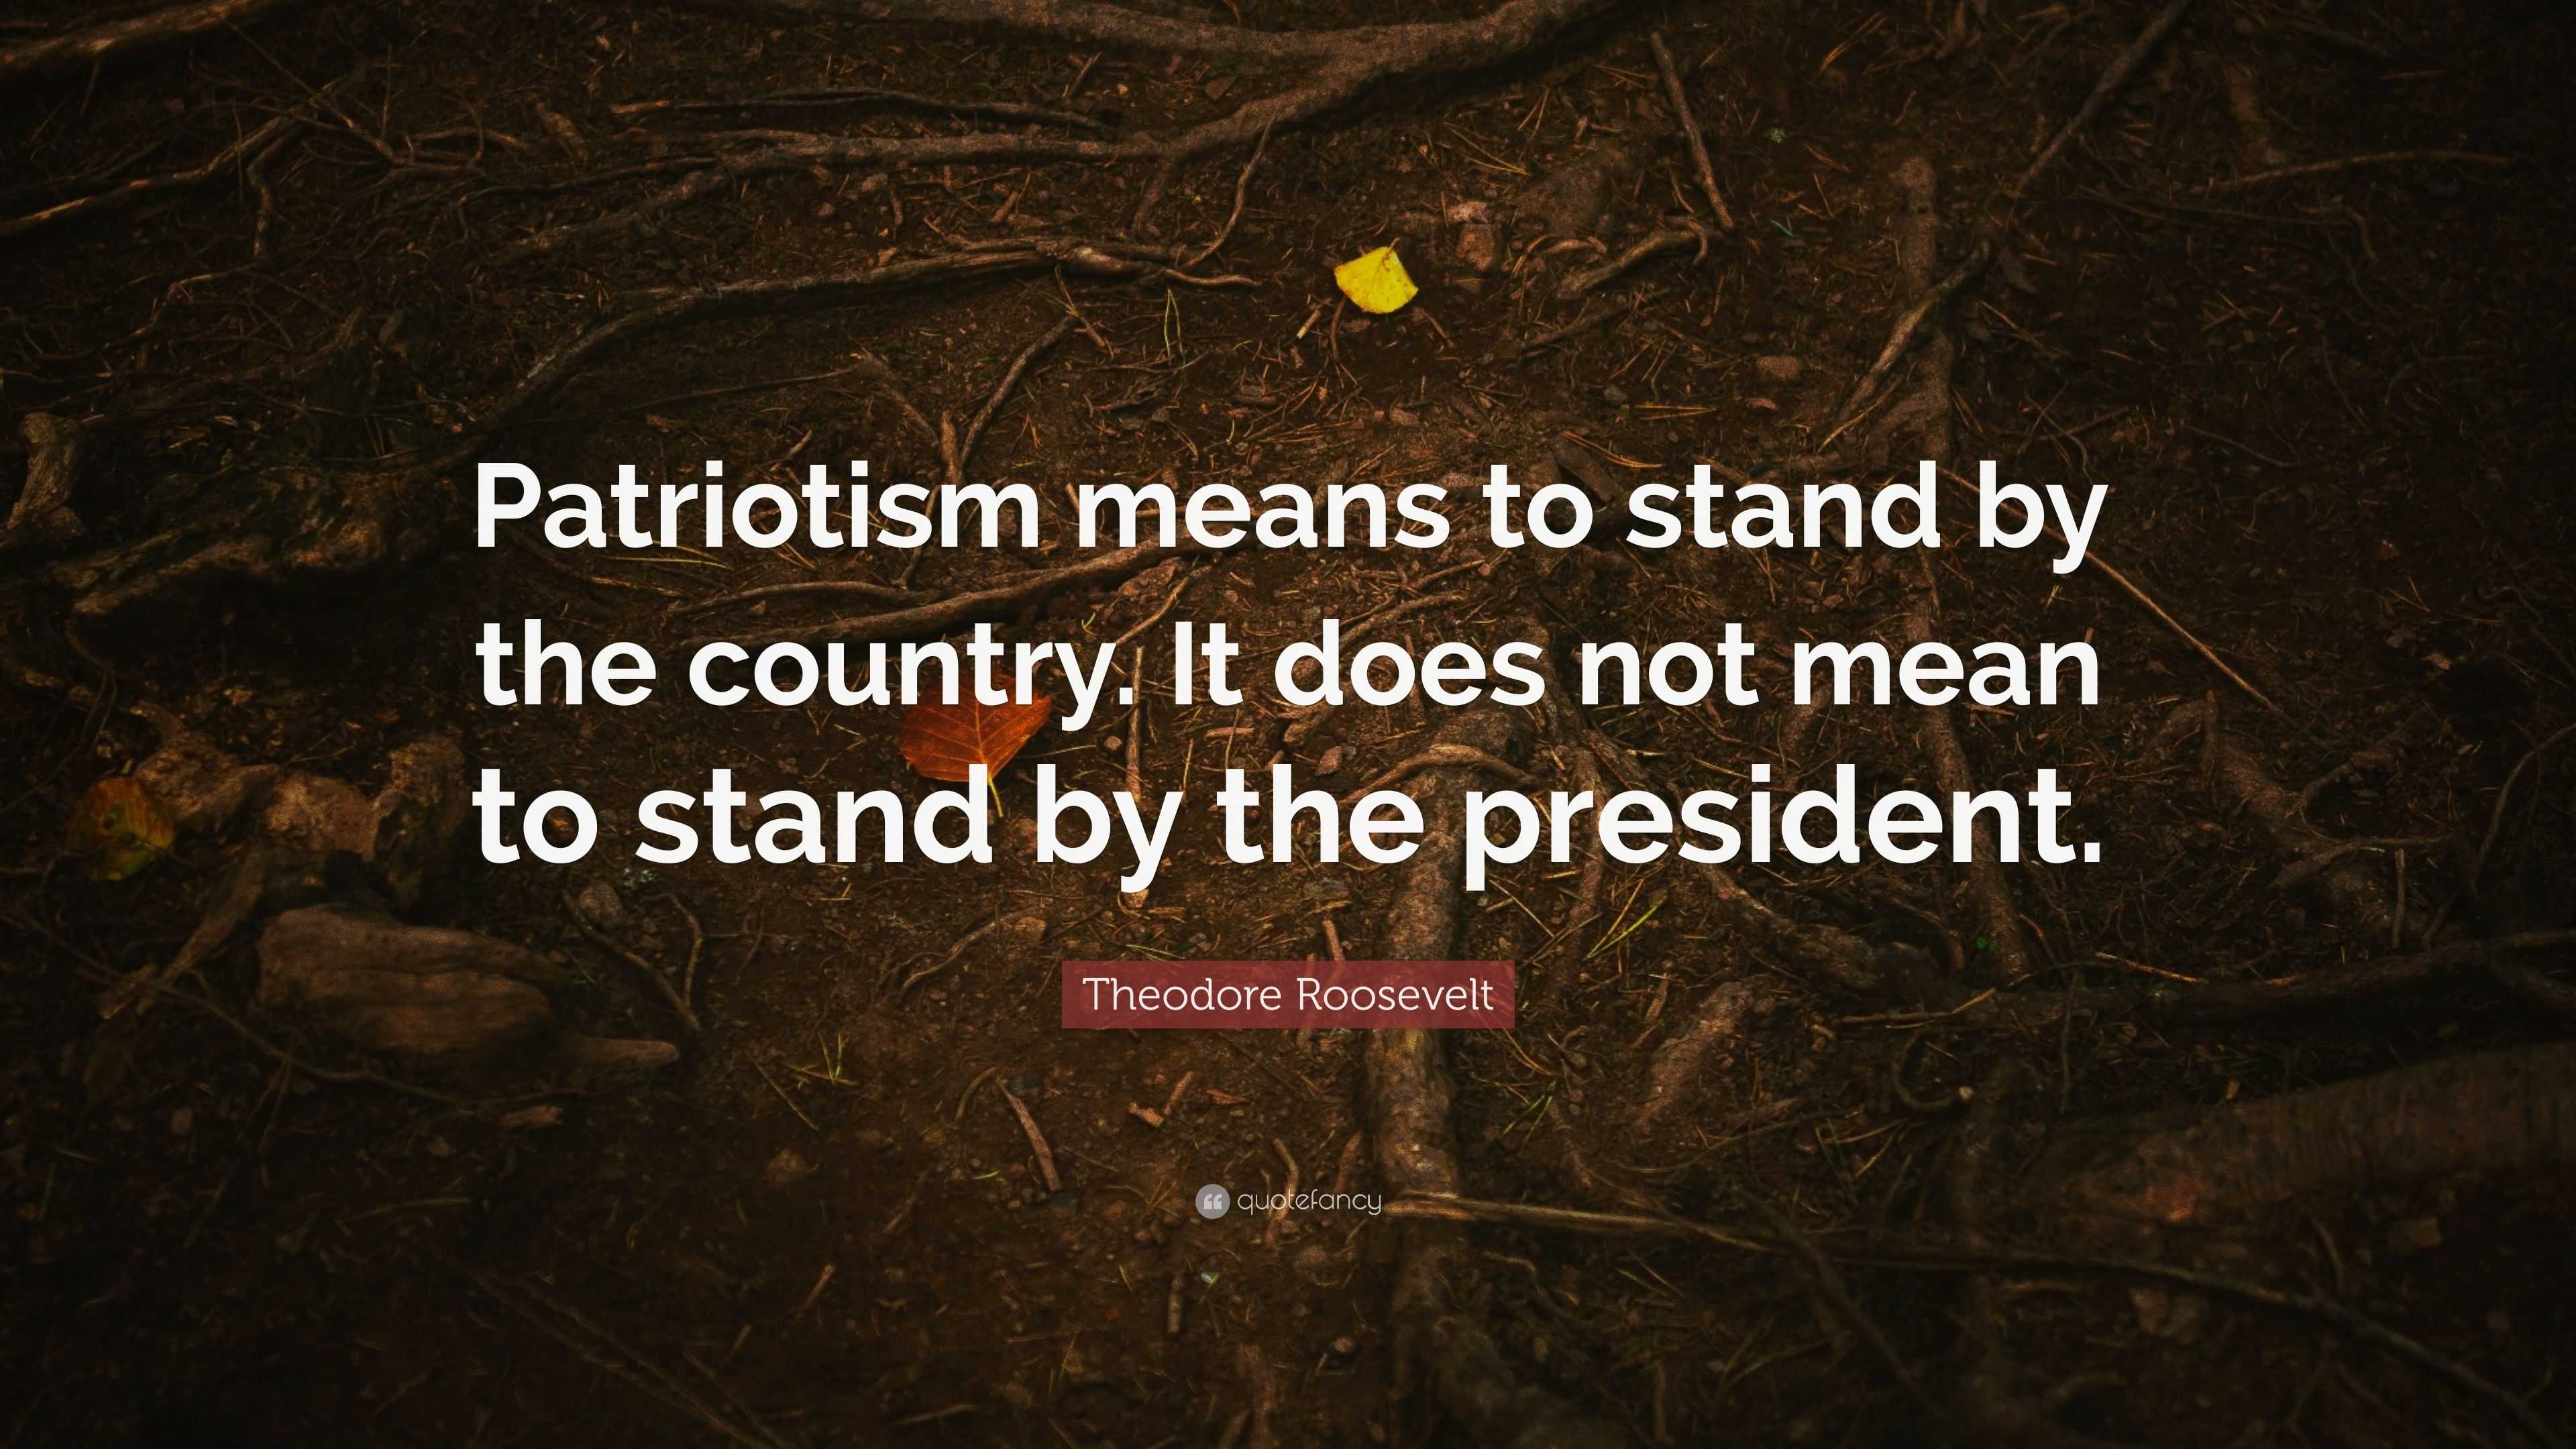 Theodore Roosevelt Quote: "Patriotism means to stand by ...